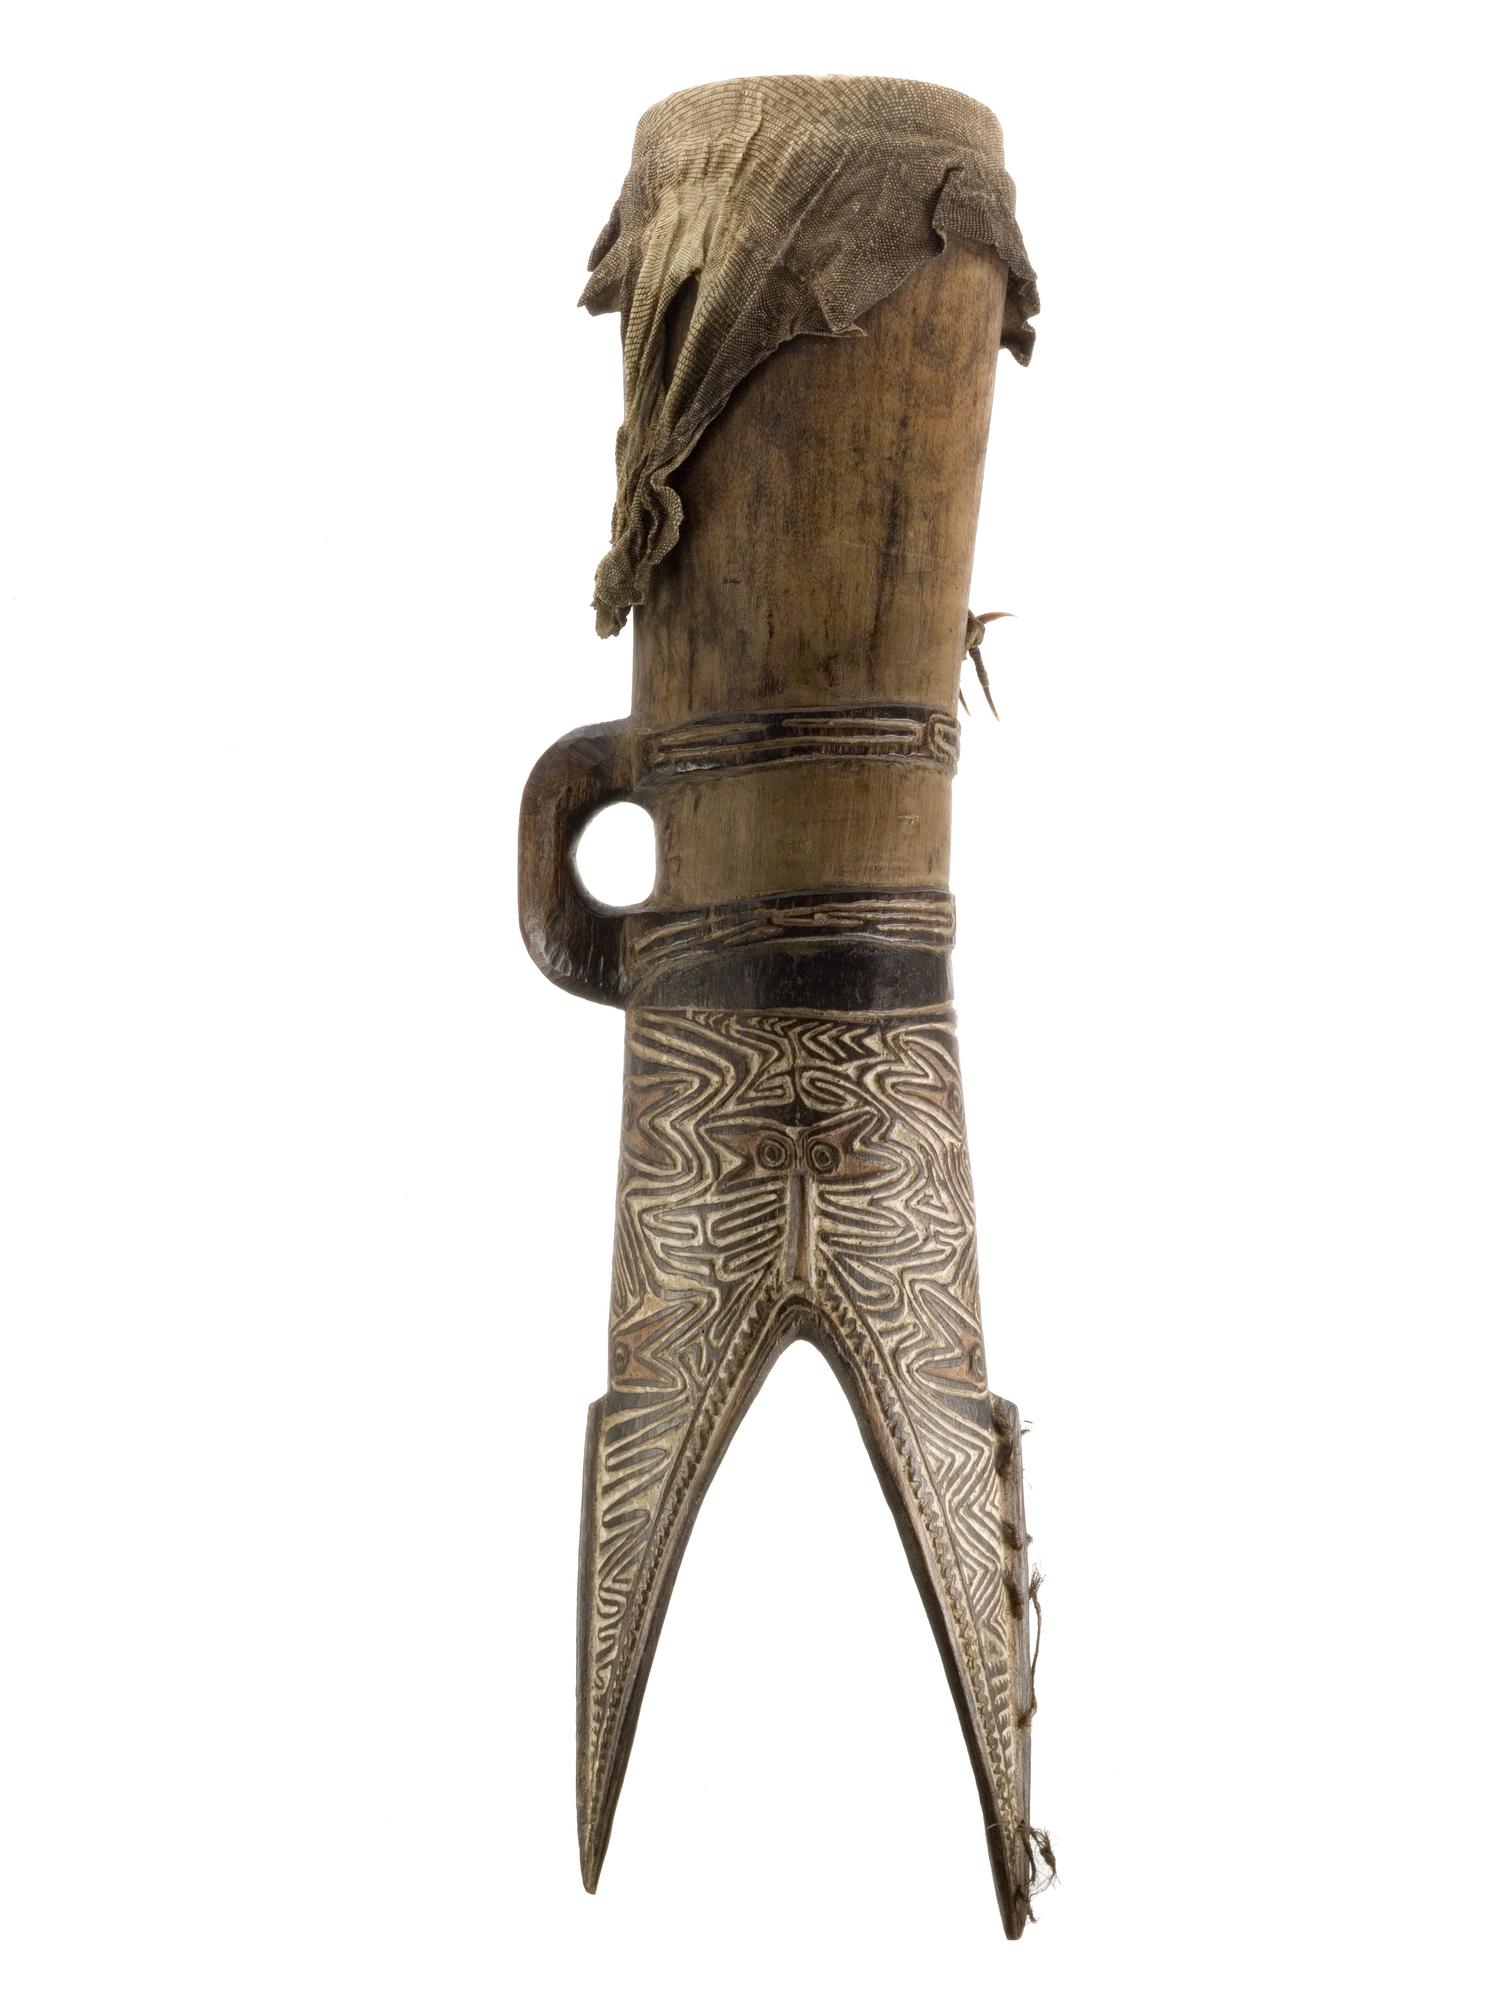 Drum carved from a tree trunk with lizard skin membrane: Melanesia, Papua New Guinea, Gulf Province, Vailala, Elema 19th century.